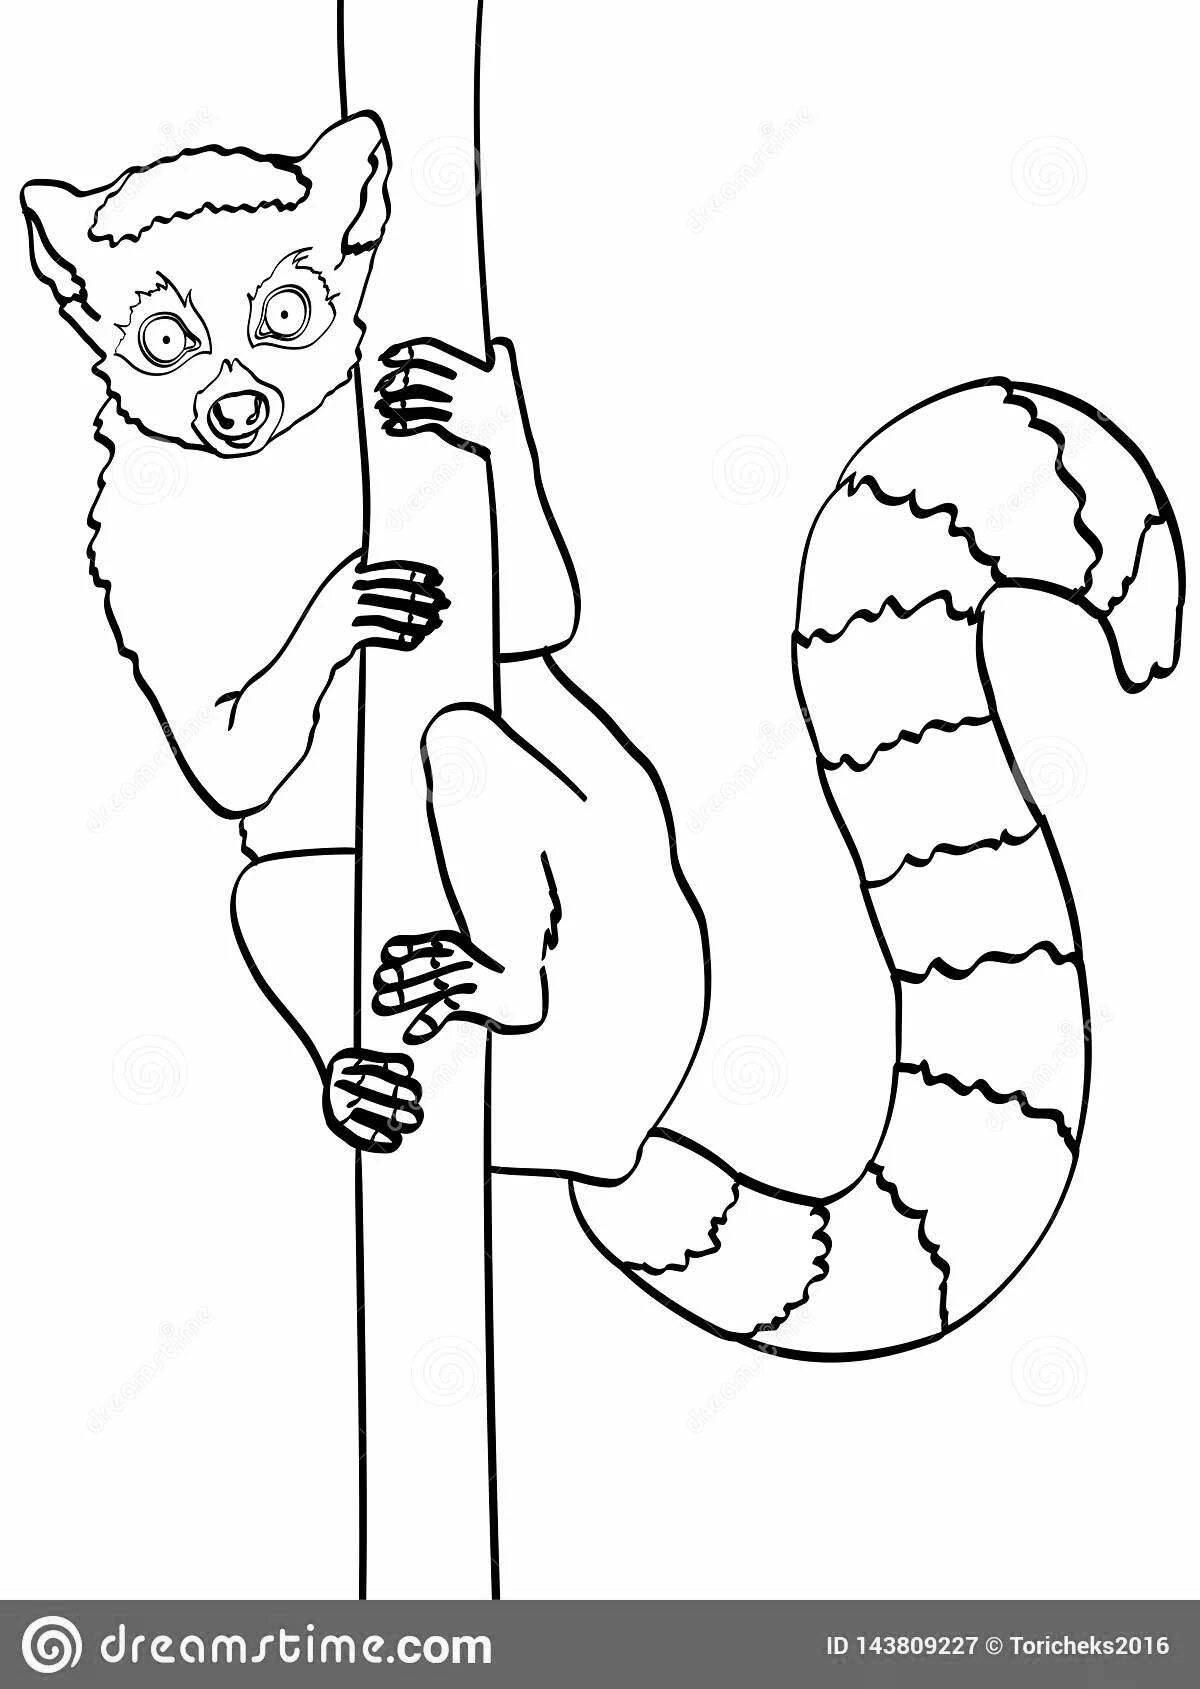 Dramatic limur coloring page